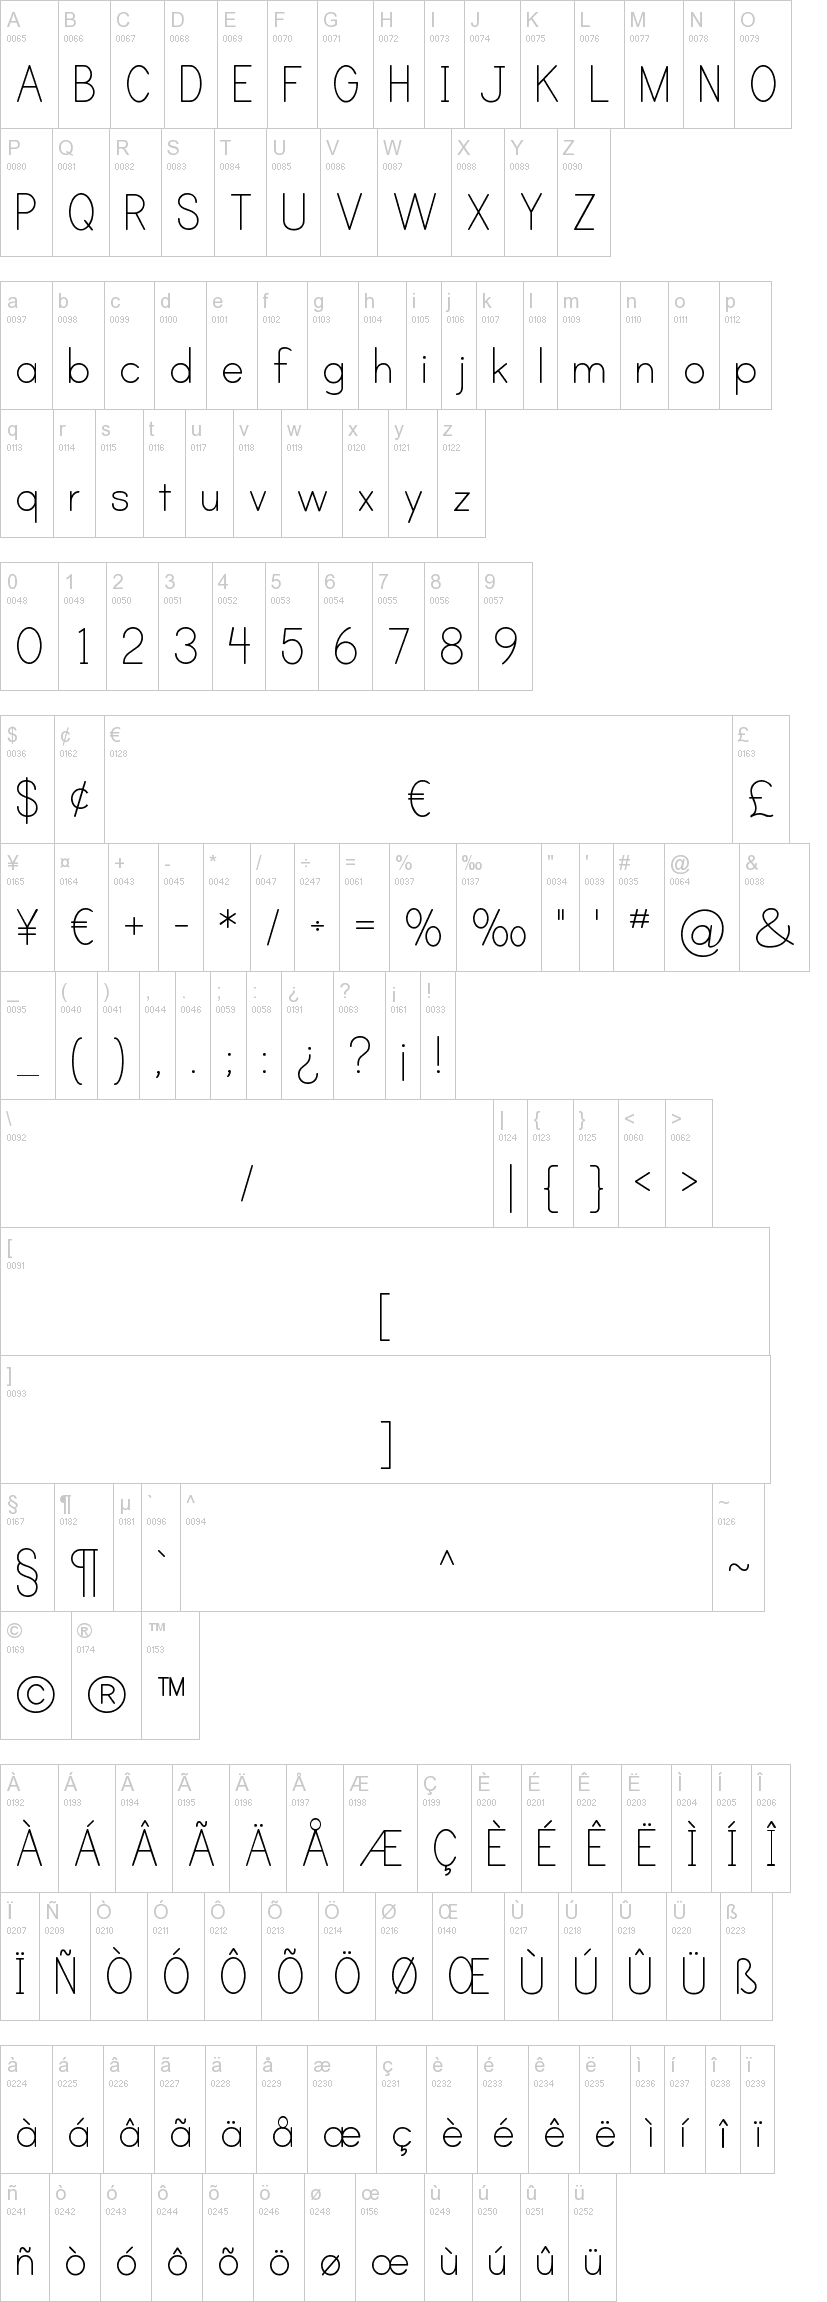 A Free Downloadable Font With Dashed Lines To Make Your Own